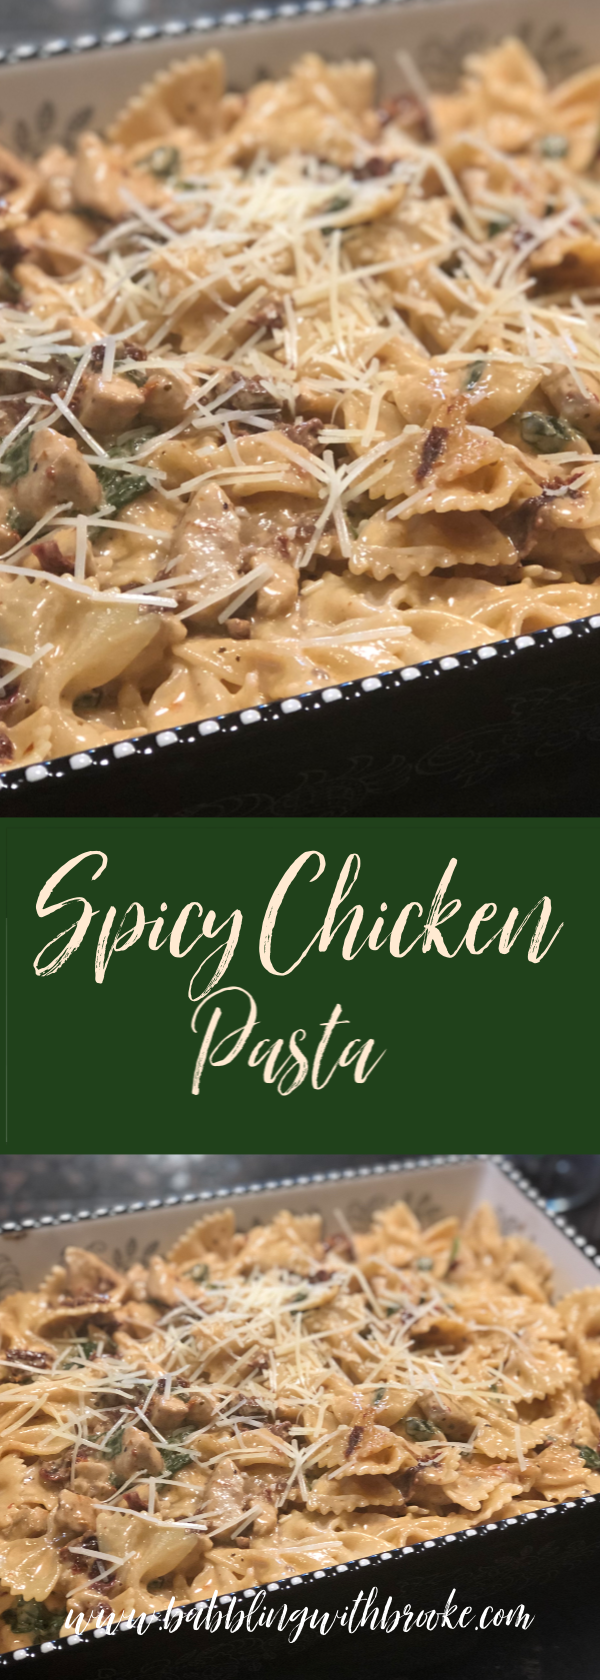 This easy chicken pasta recipe is amazing! It is so easy to make and it takes a step up from your average pasta dishes! #spicychickenpasta #easypasta #fancypasta #pastadishes